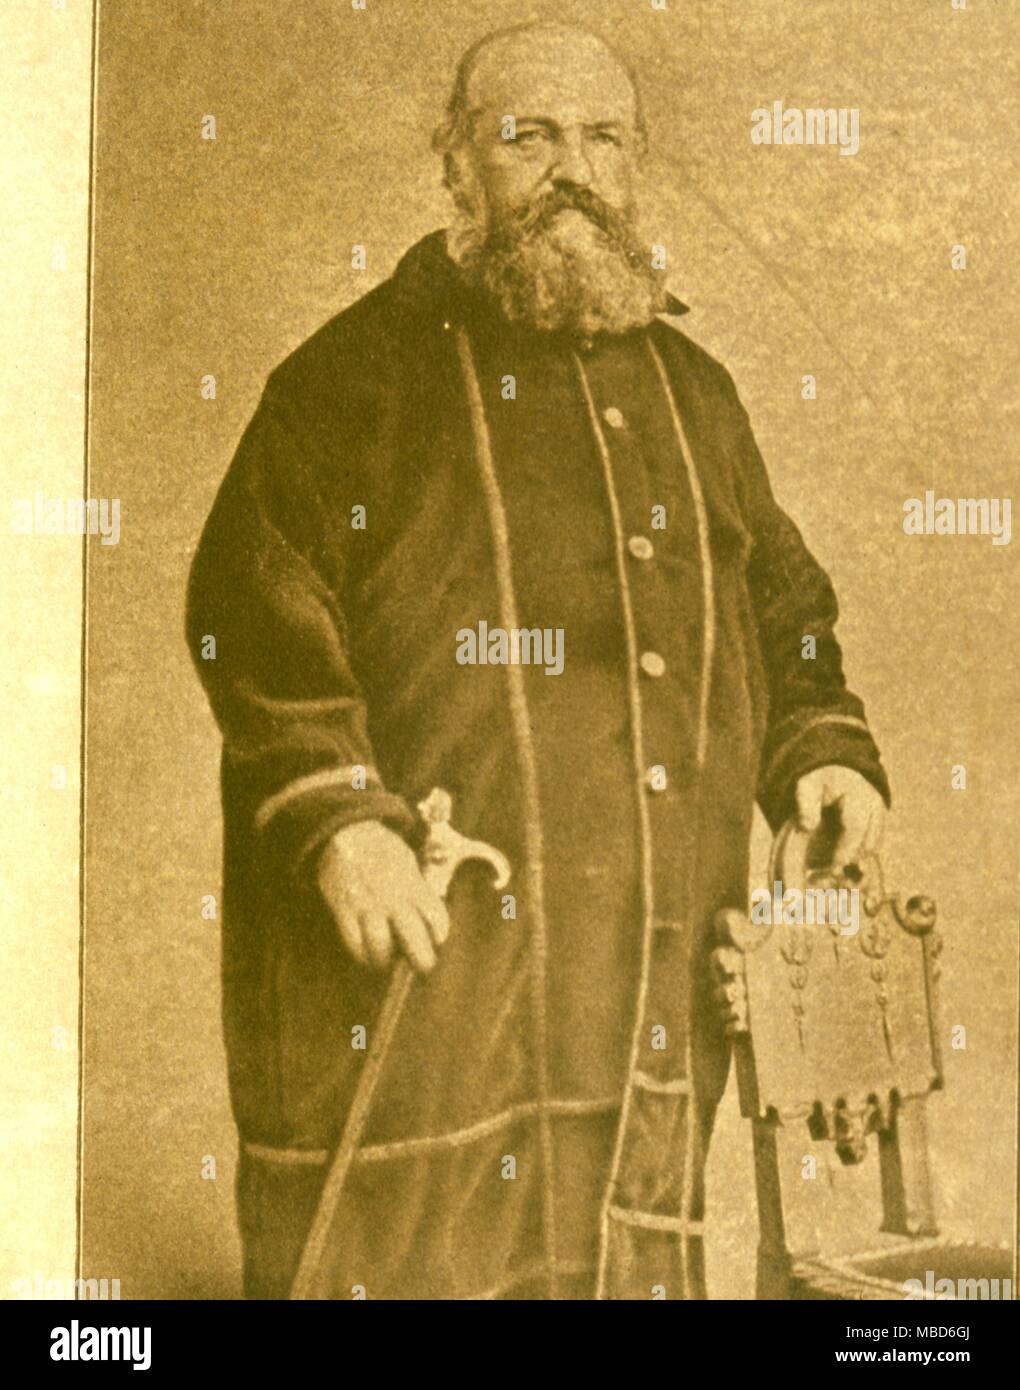 Eliphas Levi (pseudonym of Alphonse Louis Constant) - occultist, demonologist and journalist (1810 - 1875), after a photograph by James Hyatt . Stock Photo